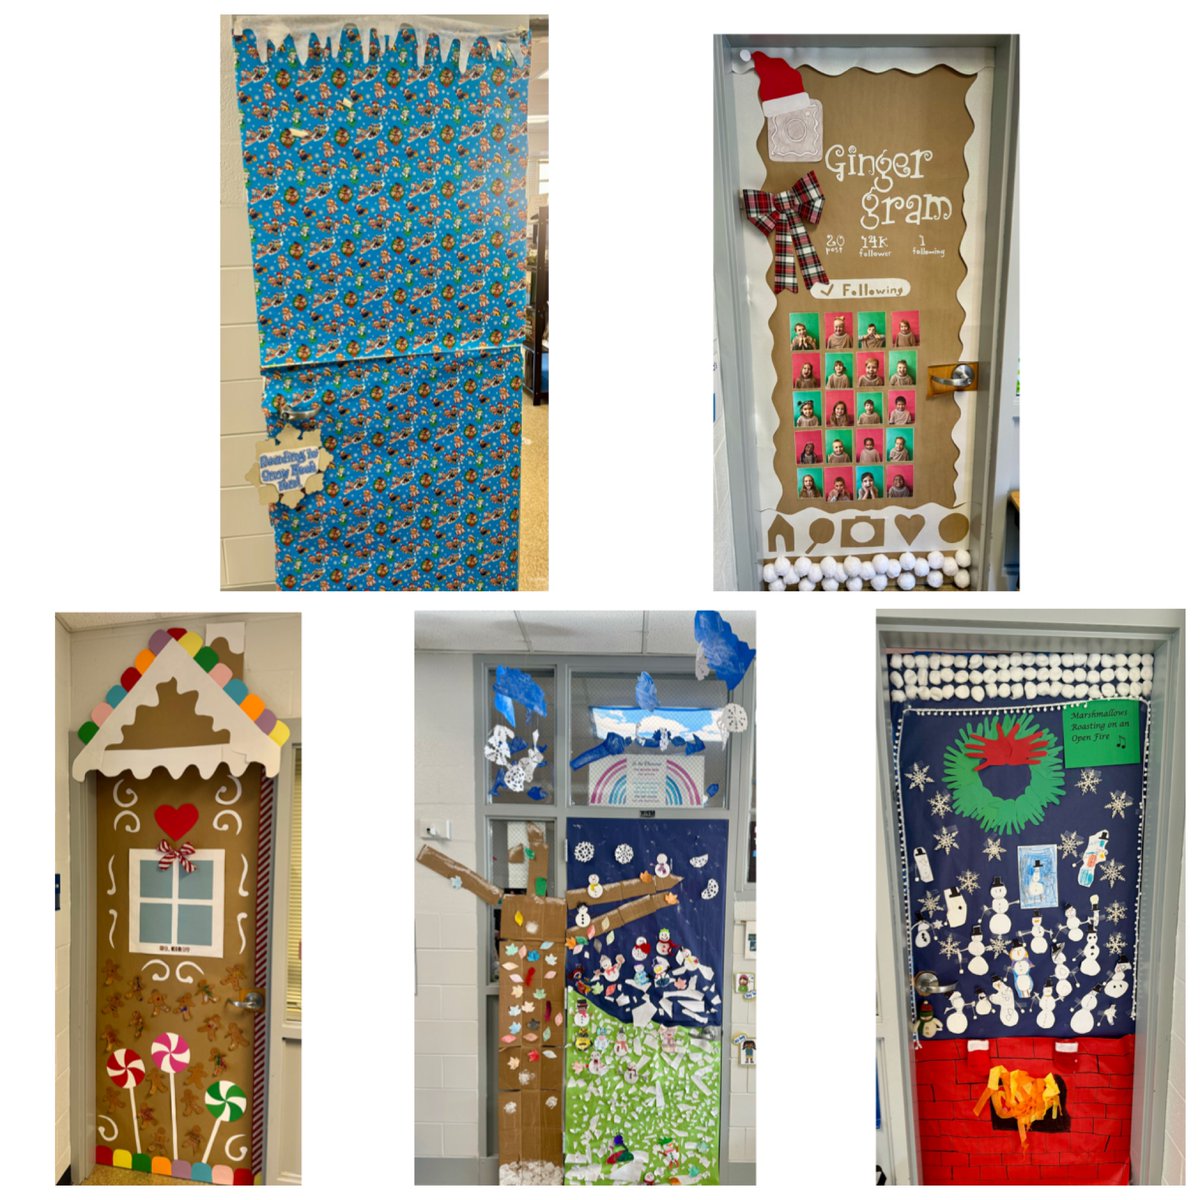 Check out our staffs Winter themed doors! ❄⛄We can't wait to see which door our families choose as their favorite! #WestMeadeMakesItFun #AACPSAwesome